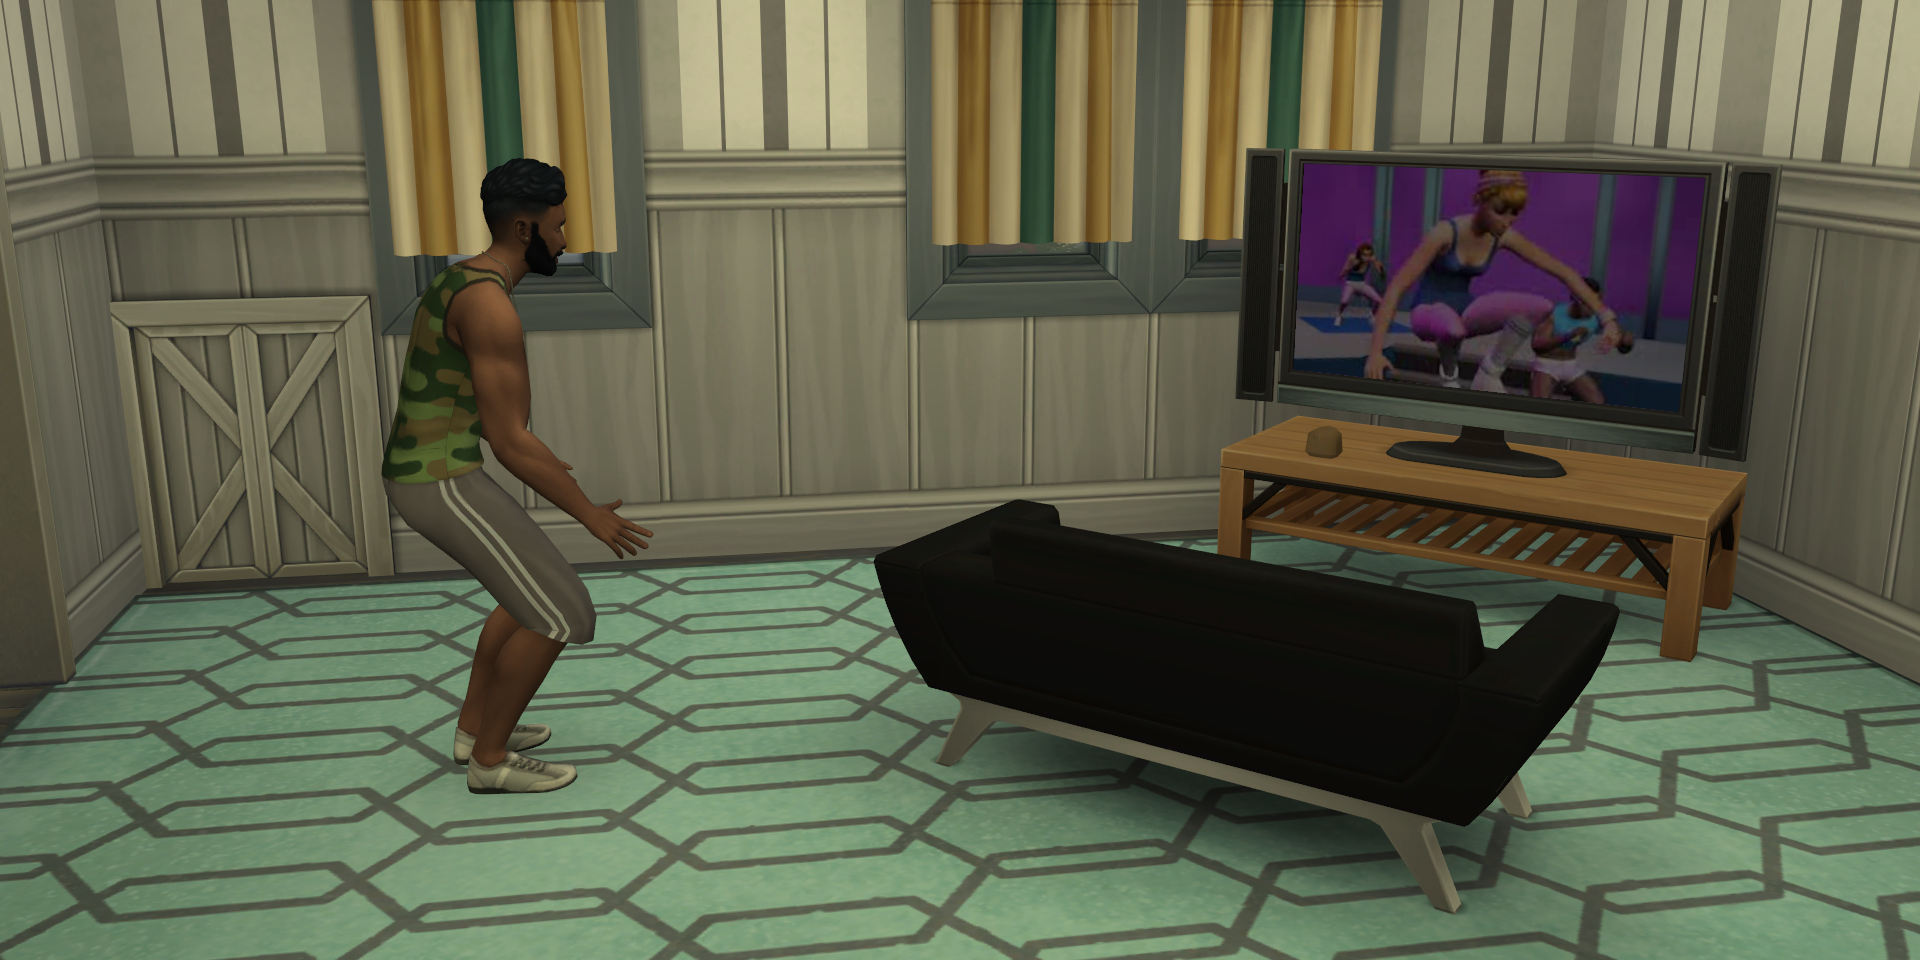 Sims 4, a Sim is doing an at-home strength workout on their TV